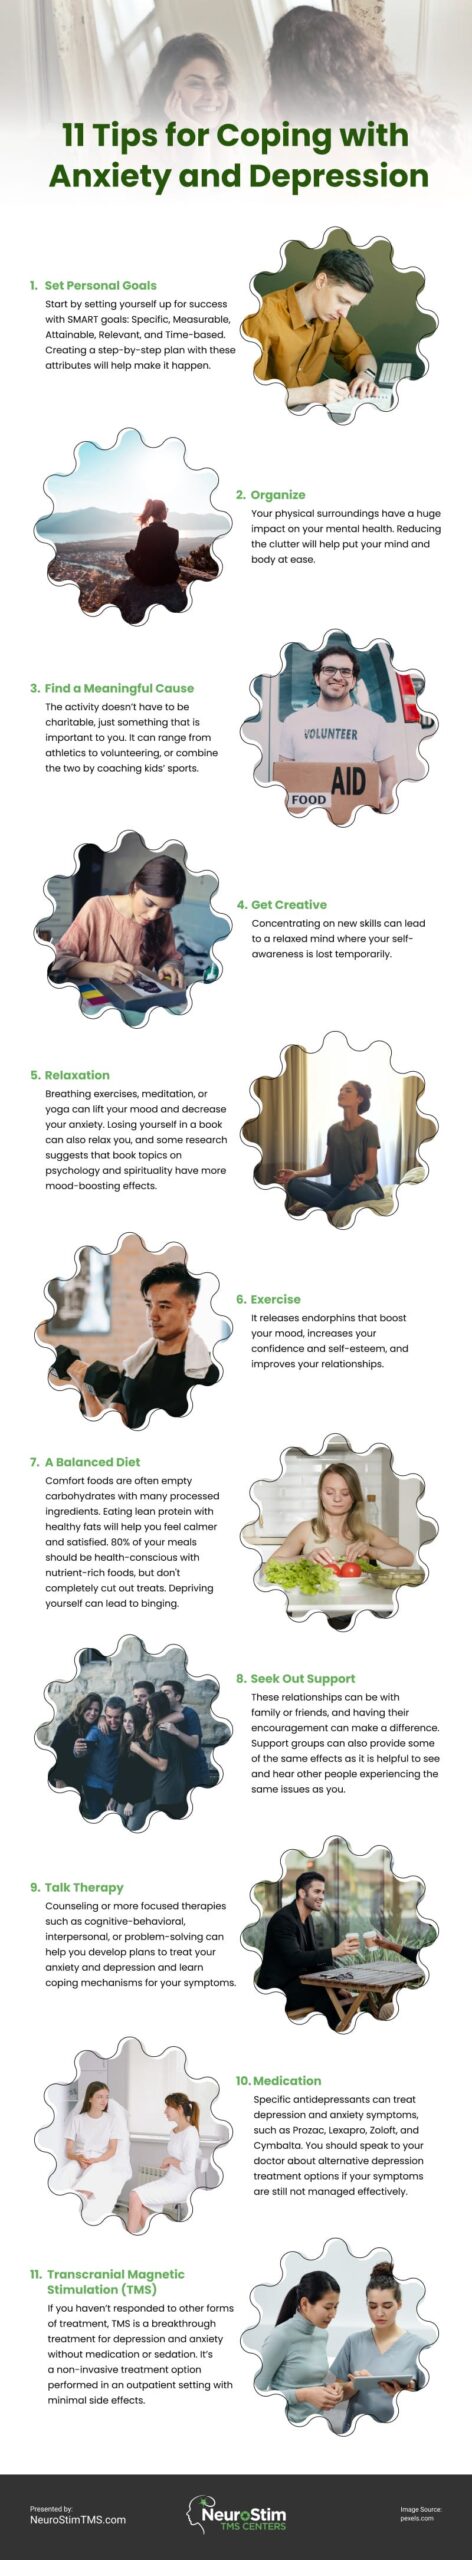 11 Tips for Coping with Anxiety and Depression Infographic